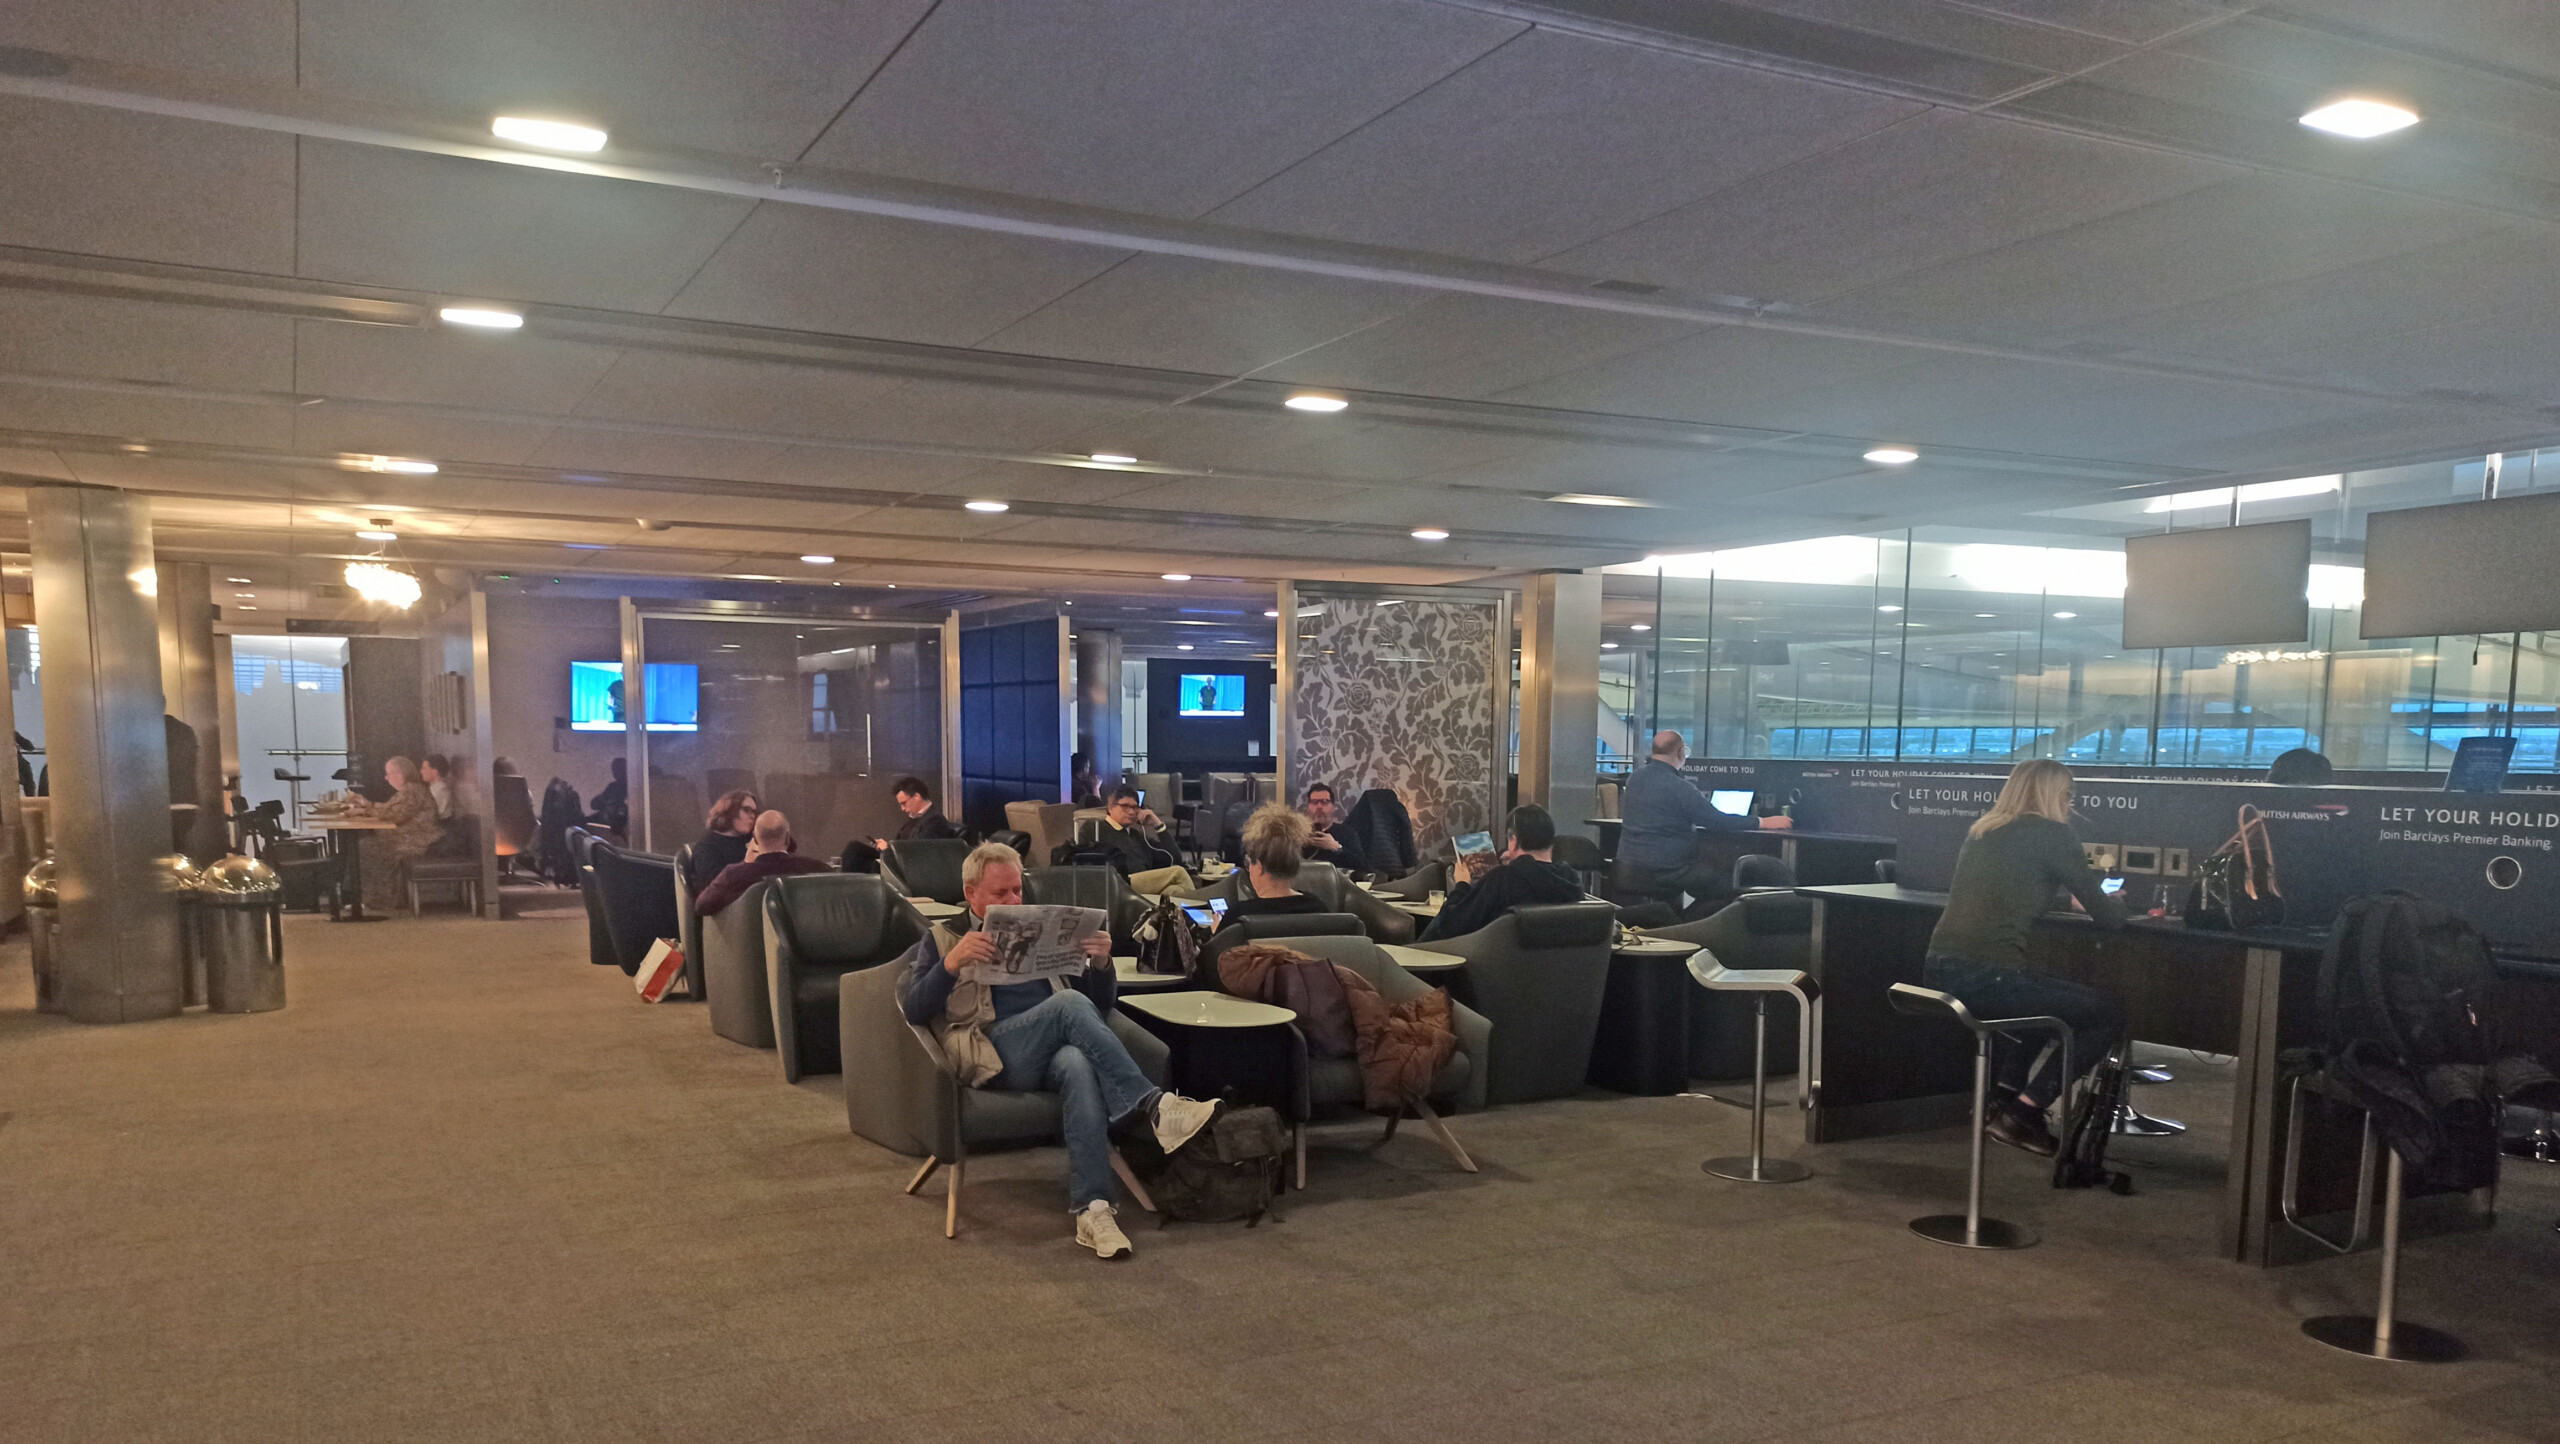 A Seating Section of the British Airways Club Lounge South